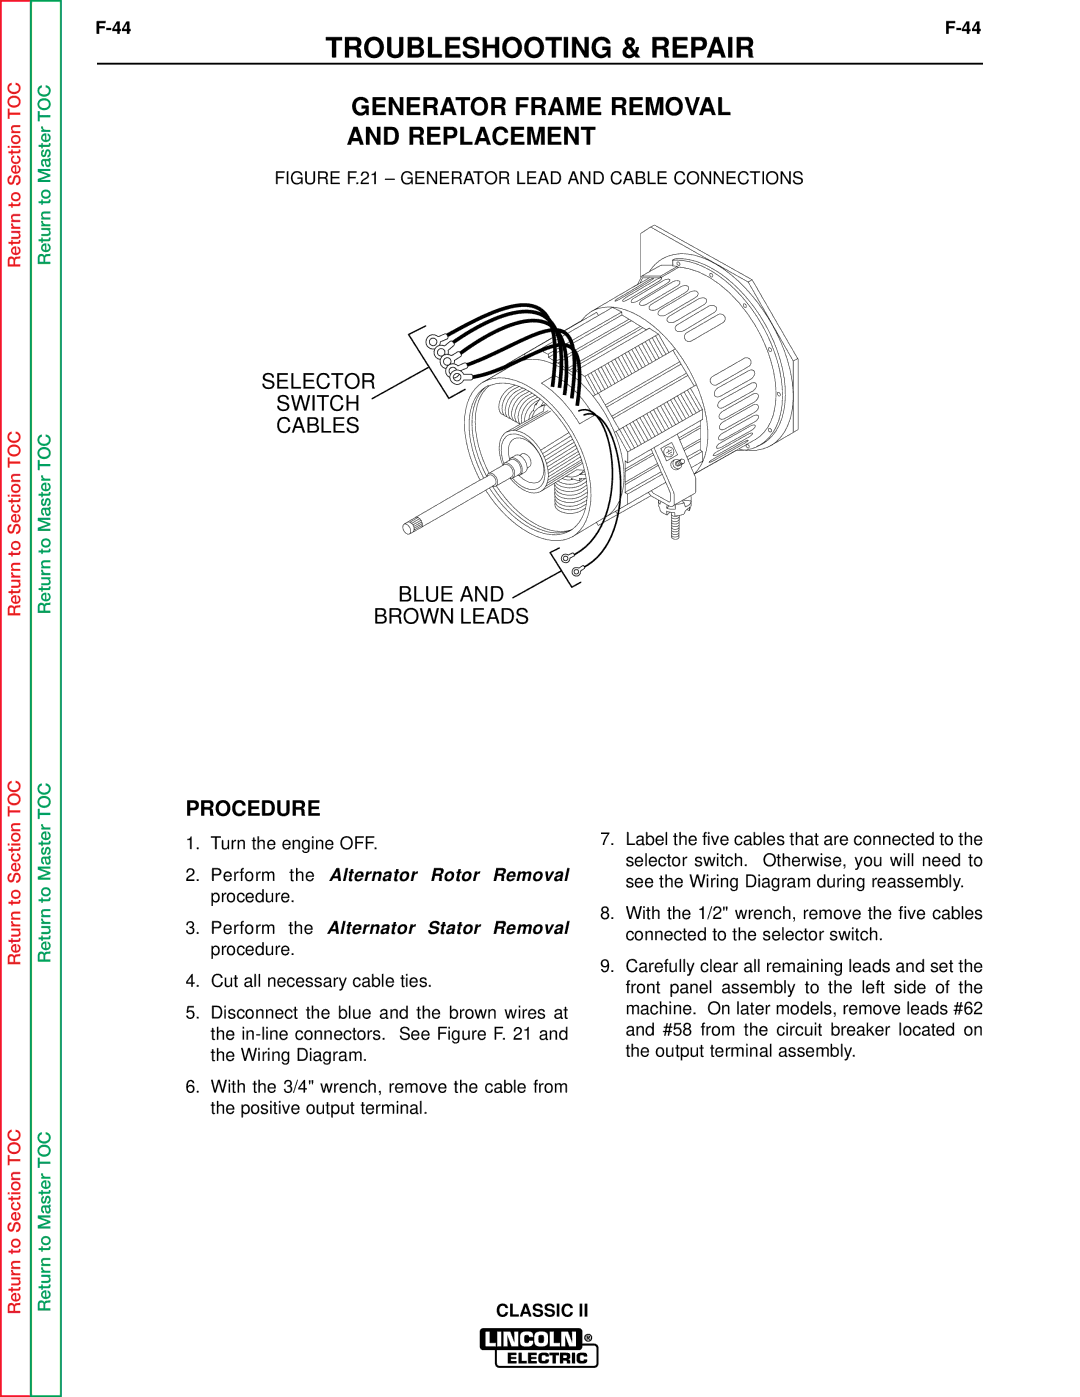 Lincoln Electric SVM125-A service manual Generator Frame Removal, Figure F.21 Generator Lead and Cable Connections 